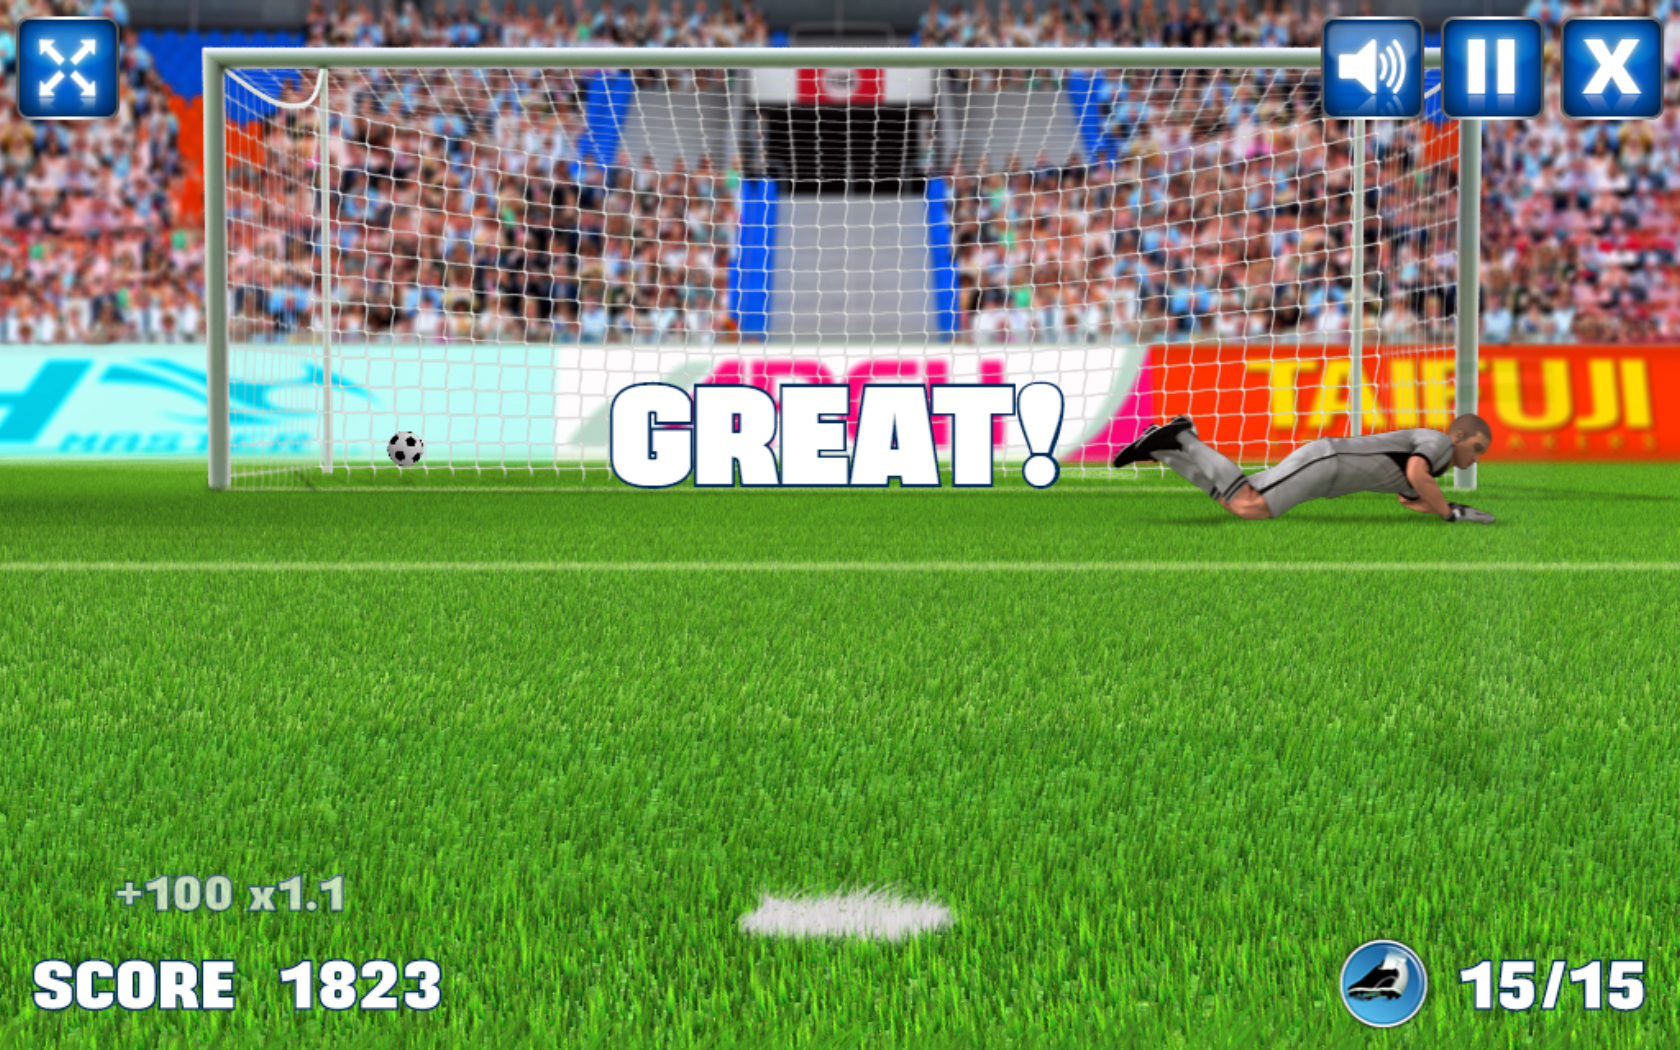 Penalty Shootout Game In JavaScript With Source Code - Source Code &  Projects